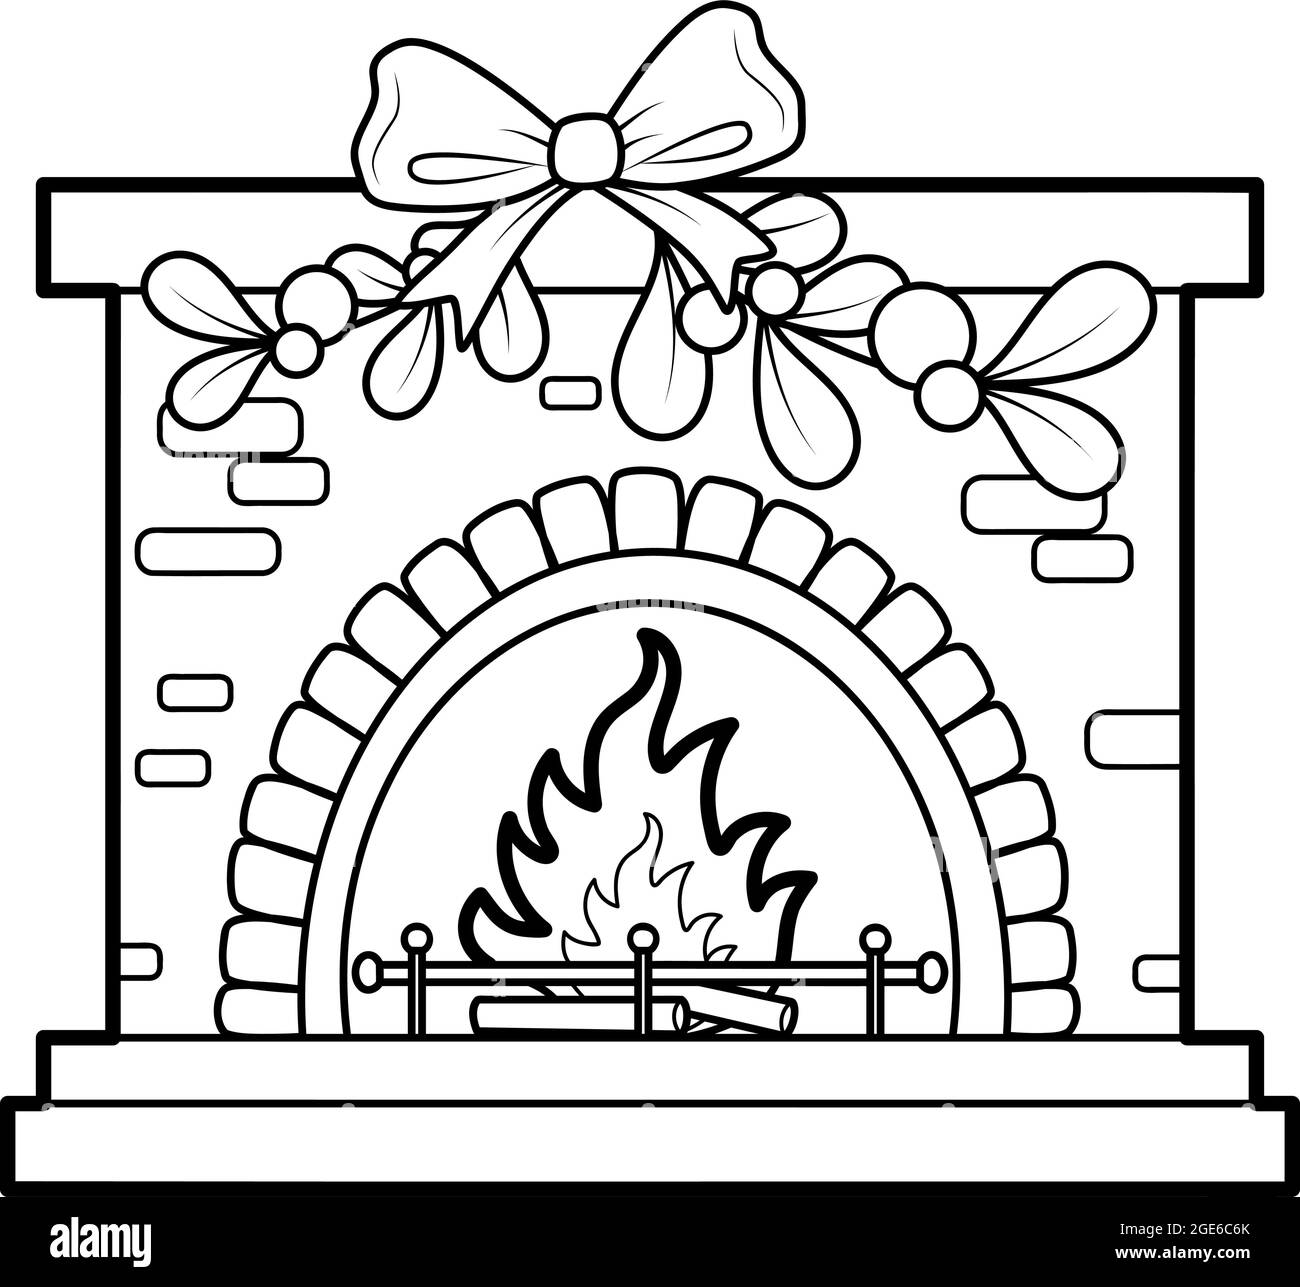 Christmas coloring book or page for kids fireplace black and white vector illustration stock vector image art